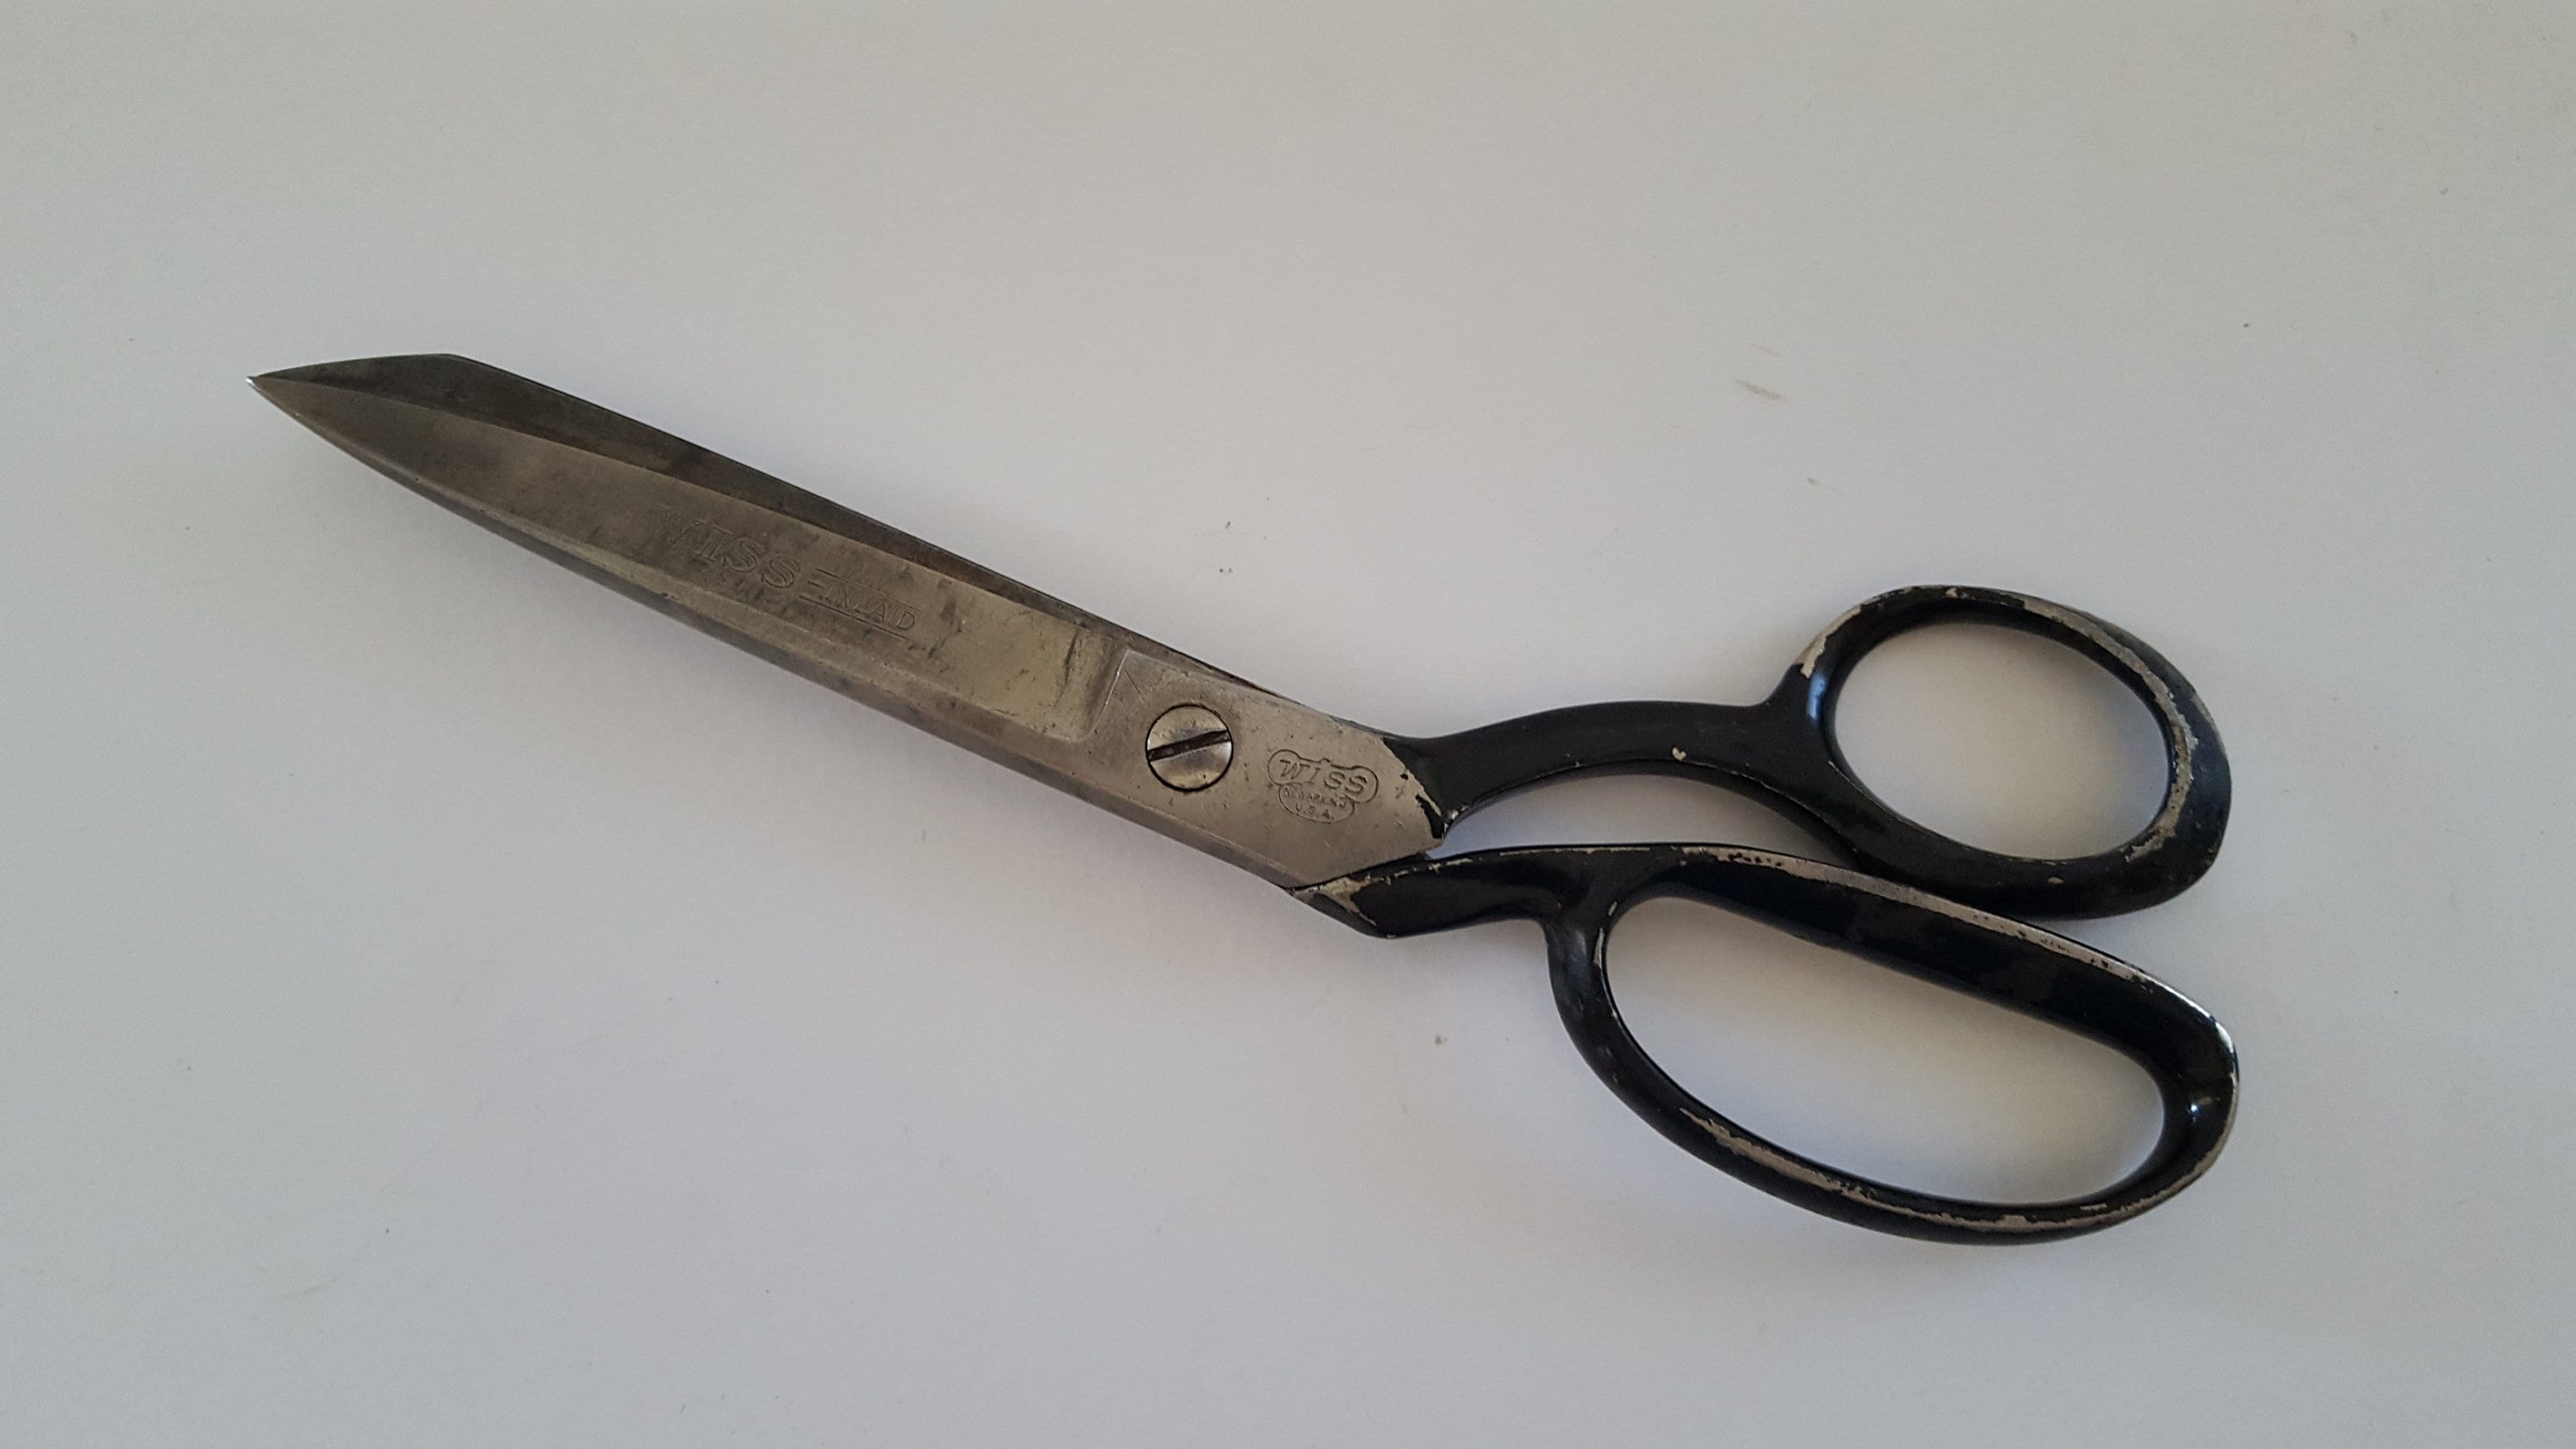 VINTAGE Wiss Inlaid USA No 22 STEEL 12 1/2 Industrial Upholstery Scissors